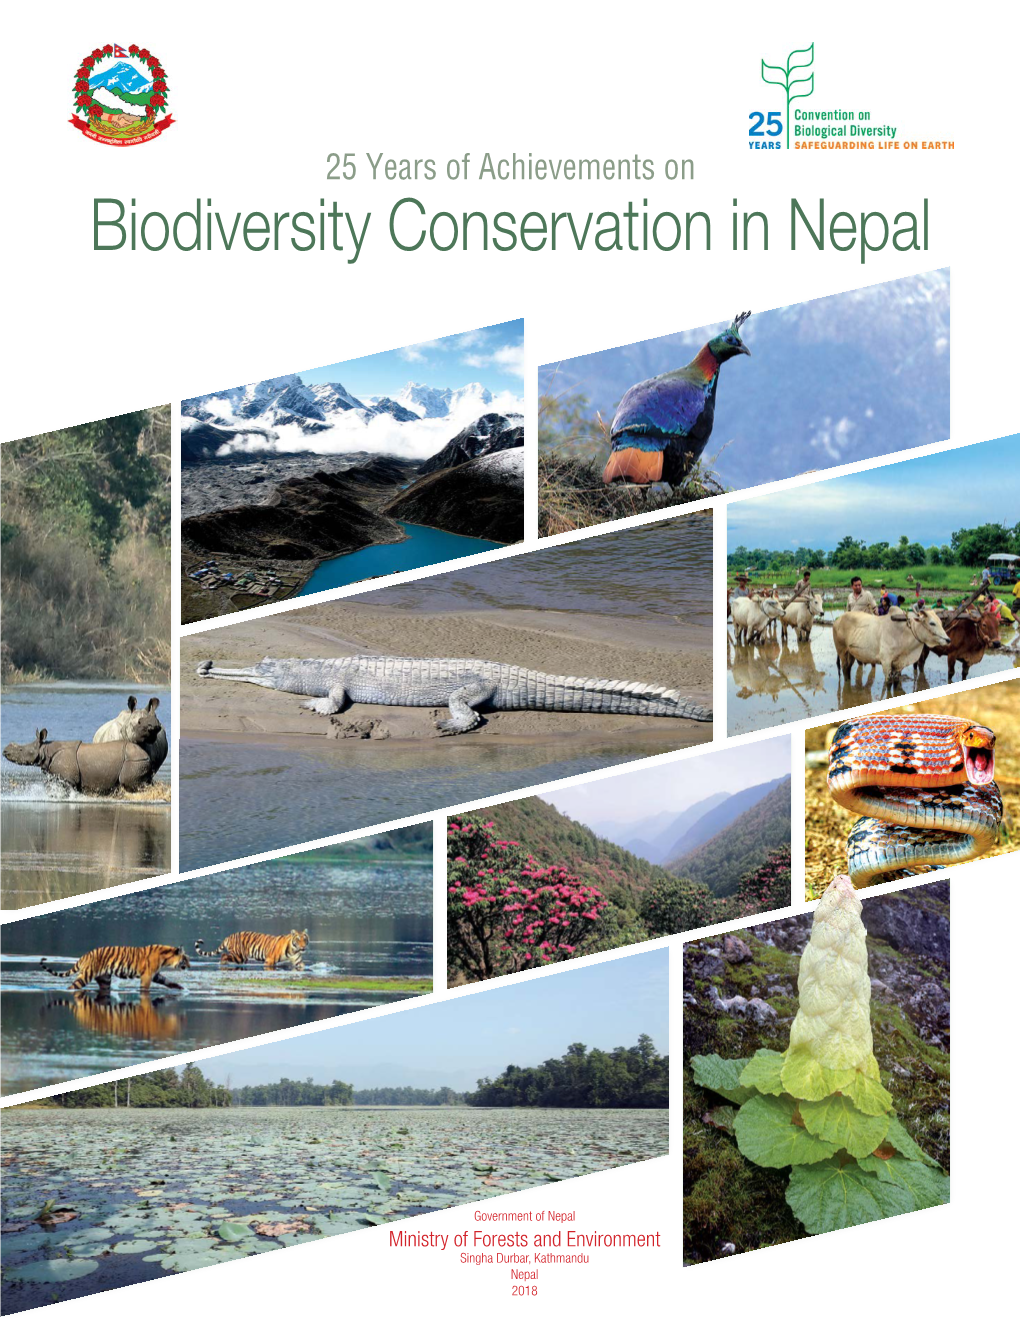 Biodiversity Conservation in Nepal 25 Years of Achievements on Biodiversity Conservation in Nepal